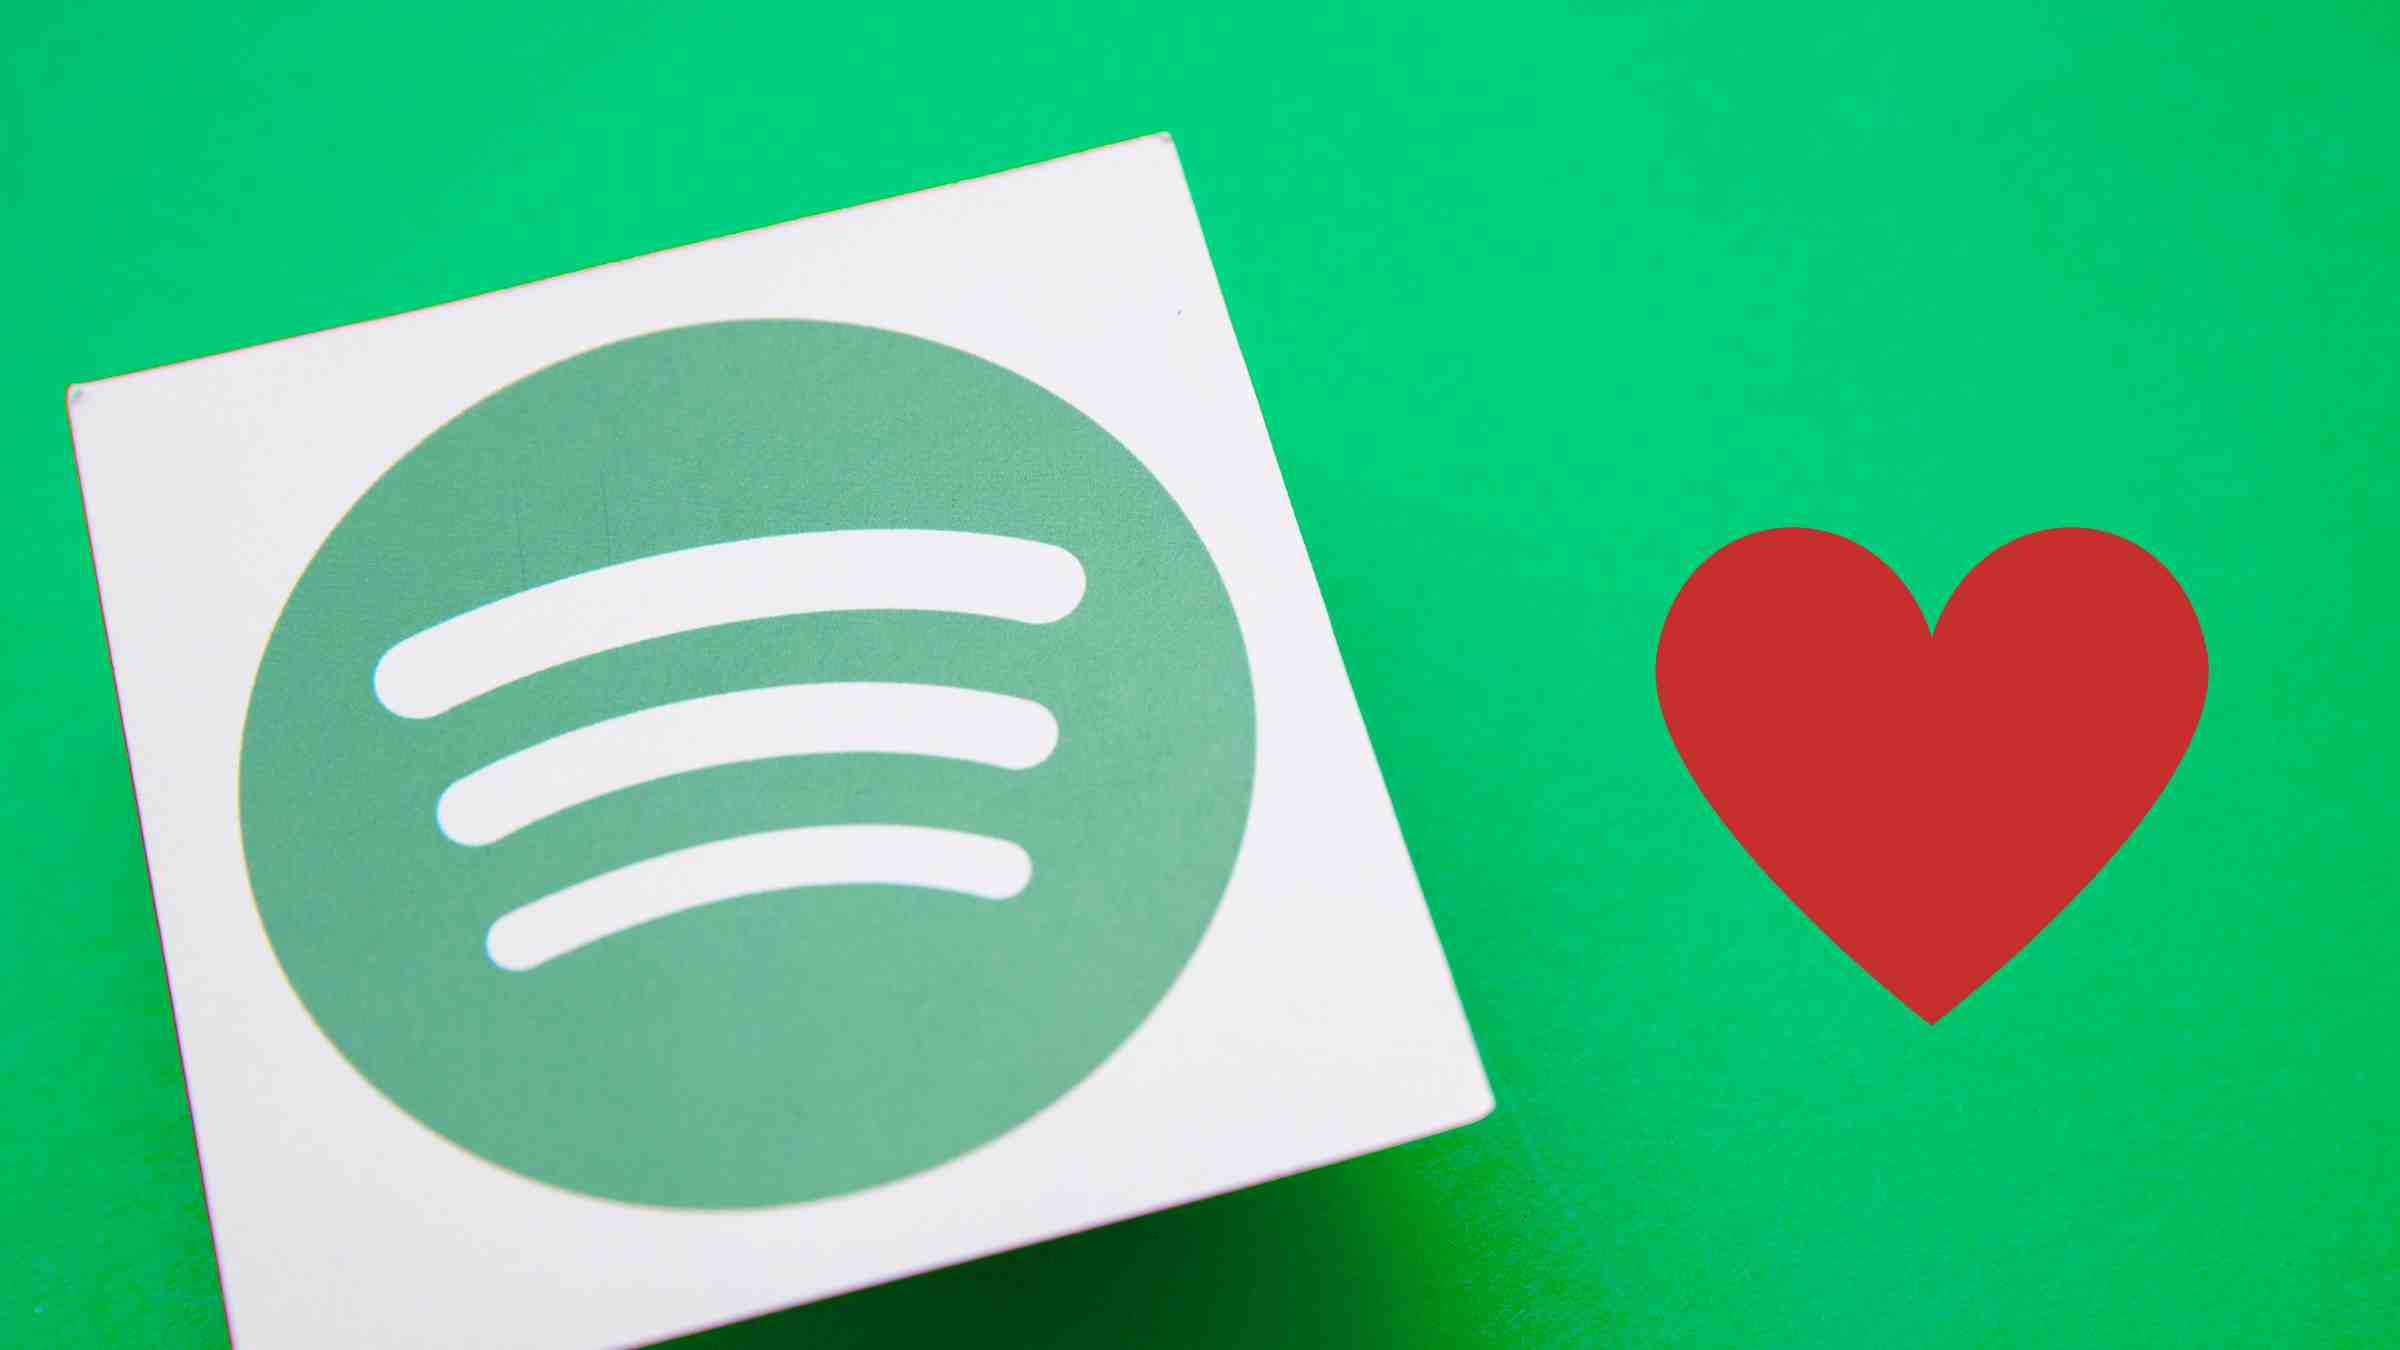 Spotify adds 15-hour monthly audiobooks streaming for Premium users, sparking both excitement and concerns over user experience. Dear Spotify, Stop the Nonsense and Bring Back the Heart ❤️ Button